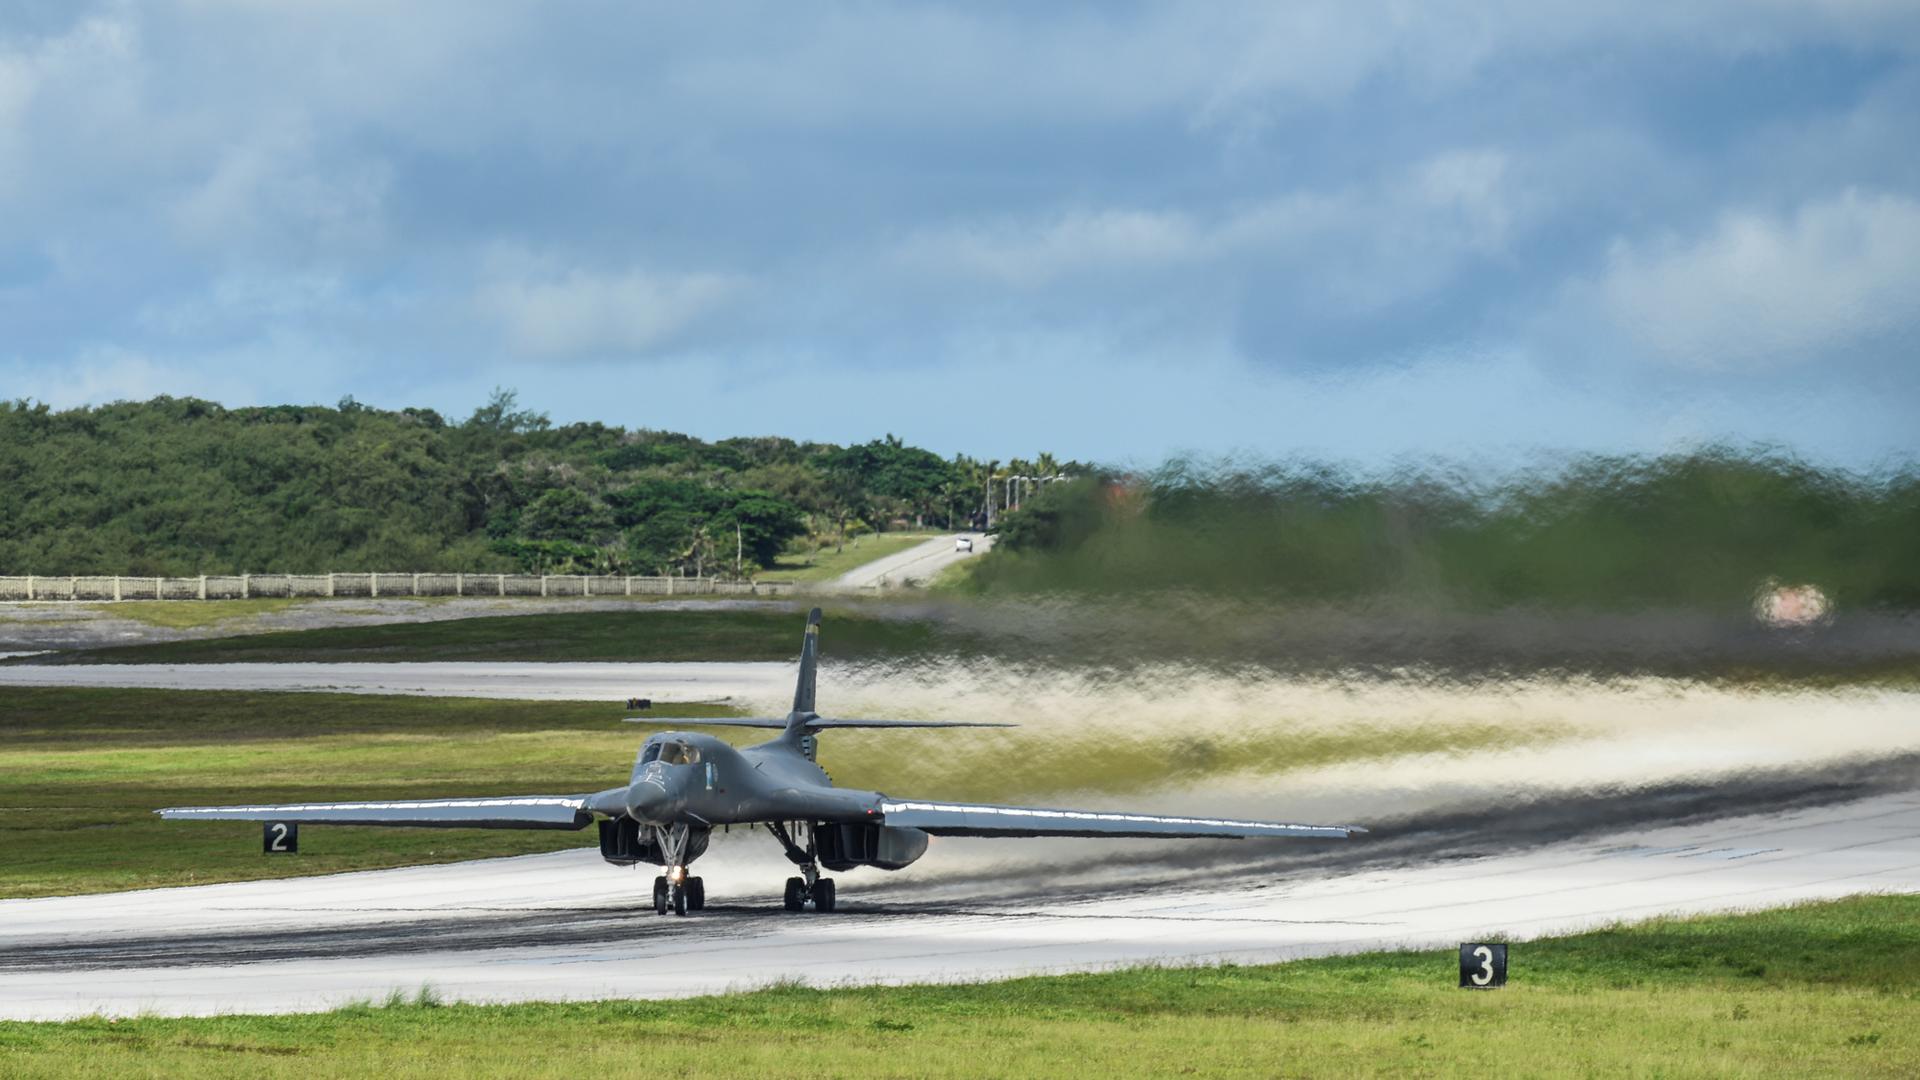 A US Air Force B-1B Lancer bomber takes off from Andersen Air Force Base, Guam.